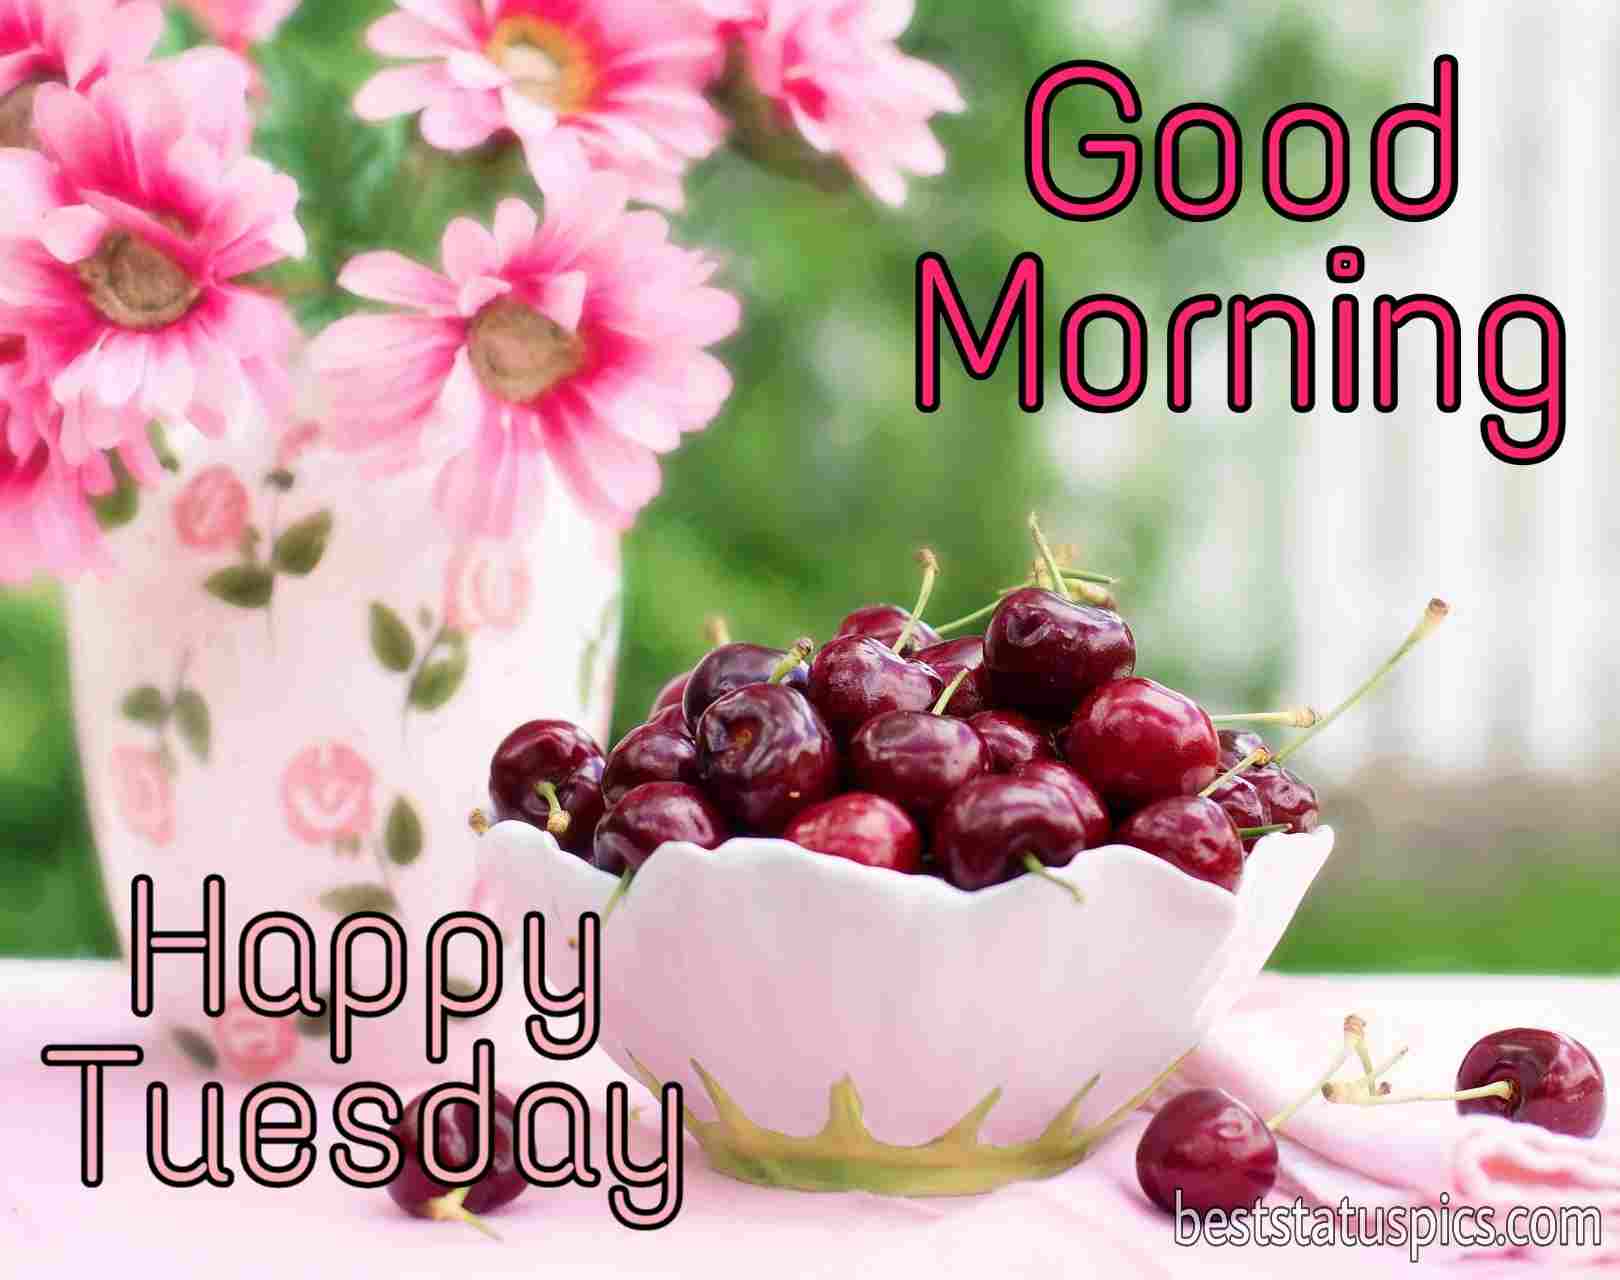 53 Good Morning Happy Tuesday Images Hd Wishes [2022] Best Status Pics